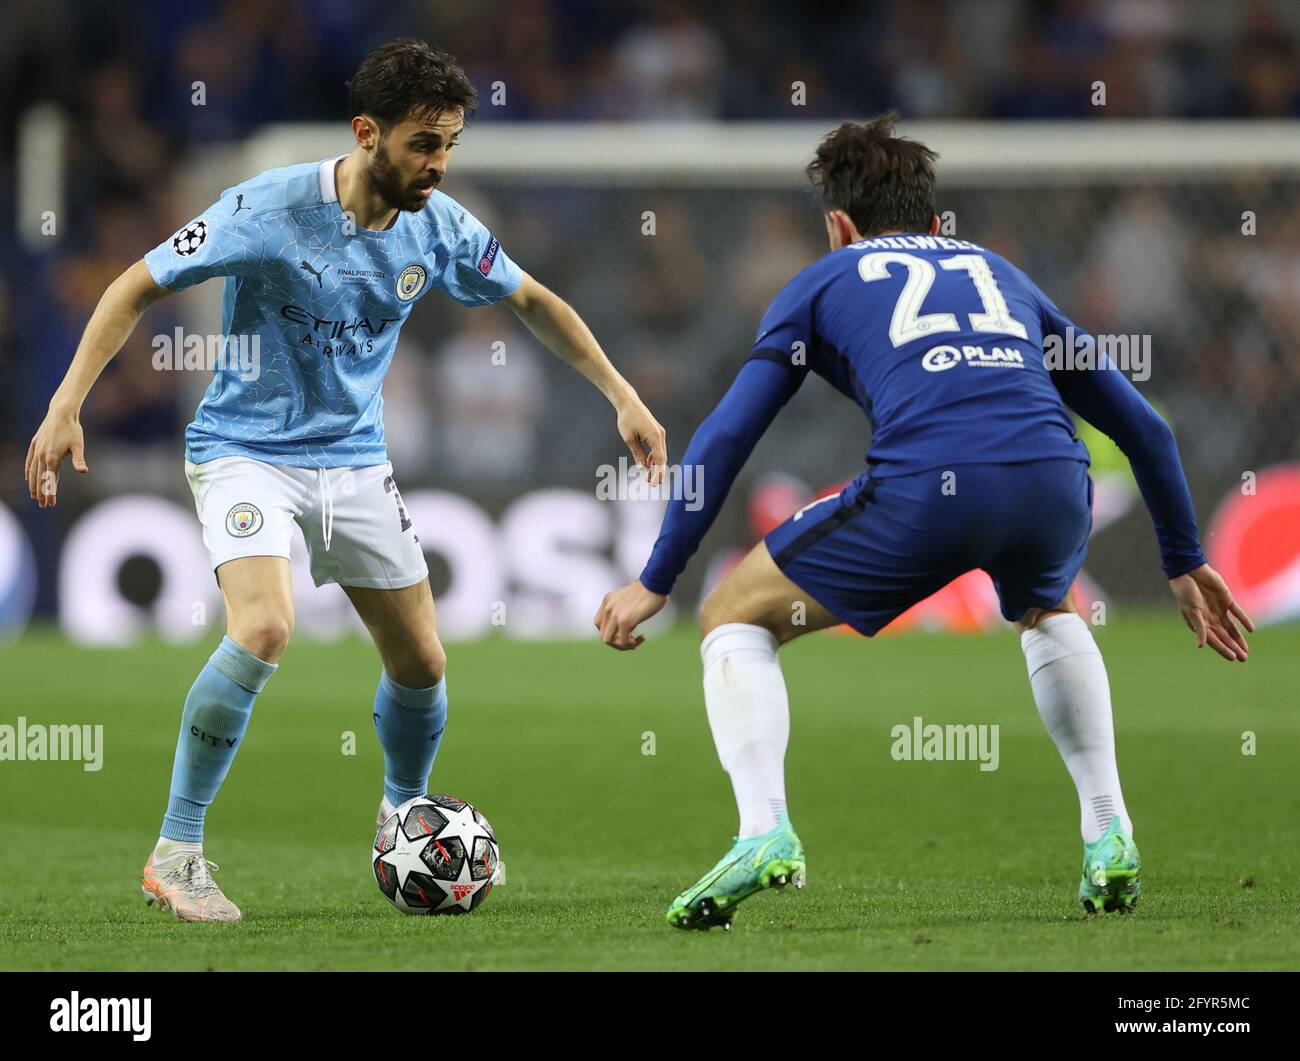 PORTO, PORTUGAL - MAY 29: Bernardo Silva of Manchester City takes on Ben Chilwell Manchester City and Chelsea FC at Estadio do Dragao on May 29, 2021 in Porto, Portugal. (Photo by MB Media) Stock Photo